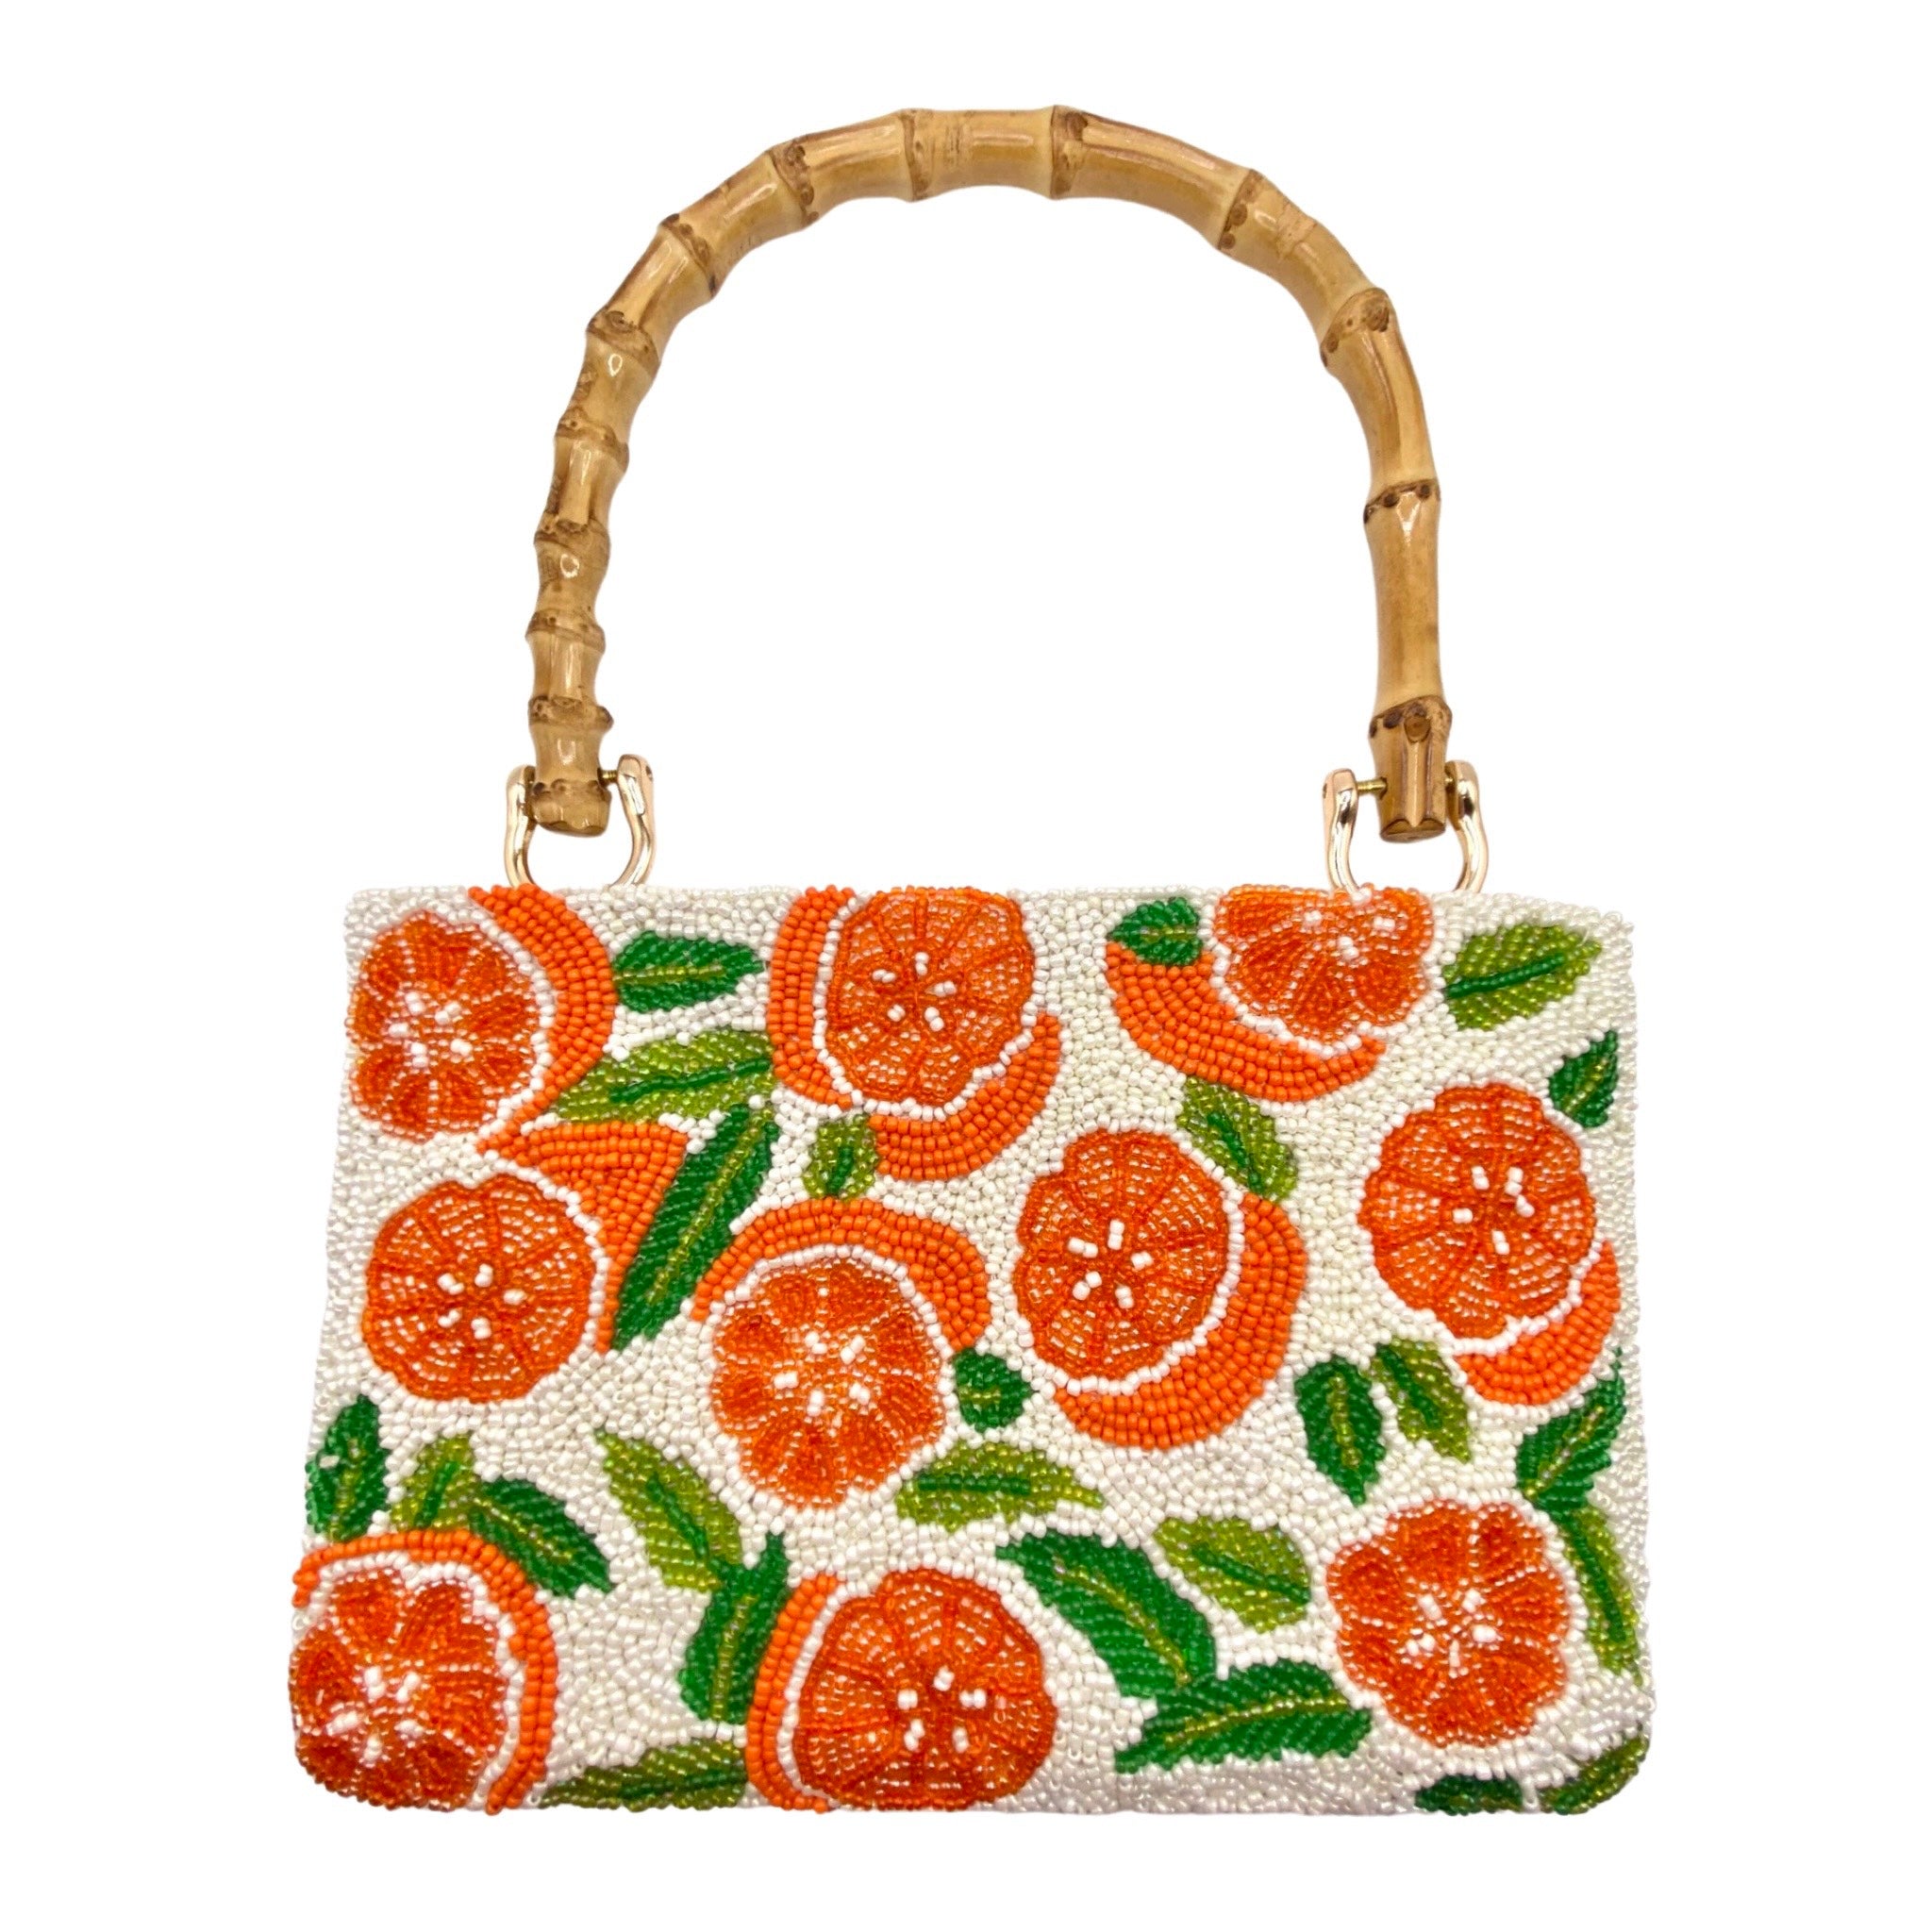 Tiana NY Love for Oranges Beaded Bag available at Shaylula Jewlery & Gifts in Tarrytown, NY and online.This cheery handmade beaded bag is petite but is still big enough to hold all your essentials and it has a zipper closure to keep everything safe! It features a bamboo handle and a satin lining with a small interior pocket. • 8.5" W x 6" H